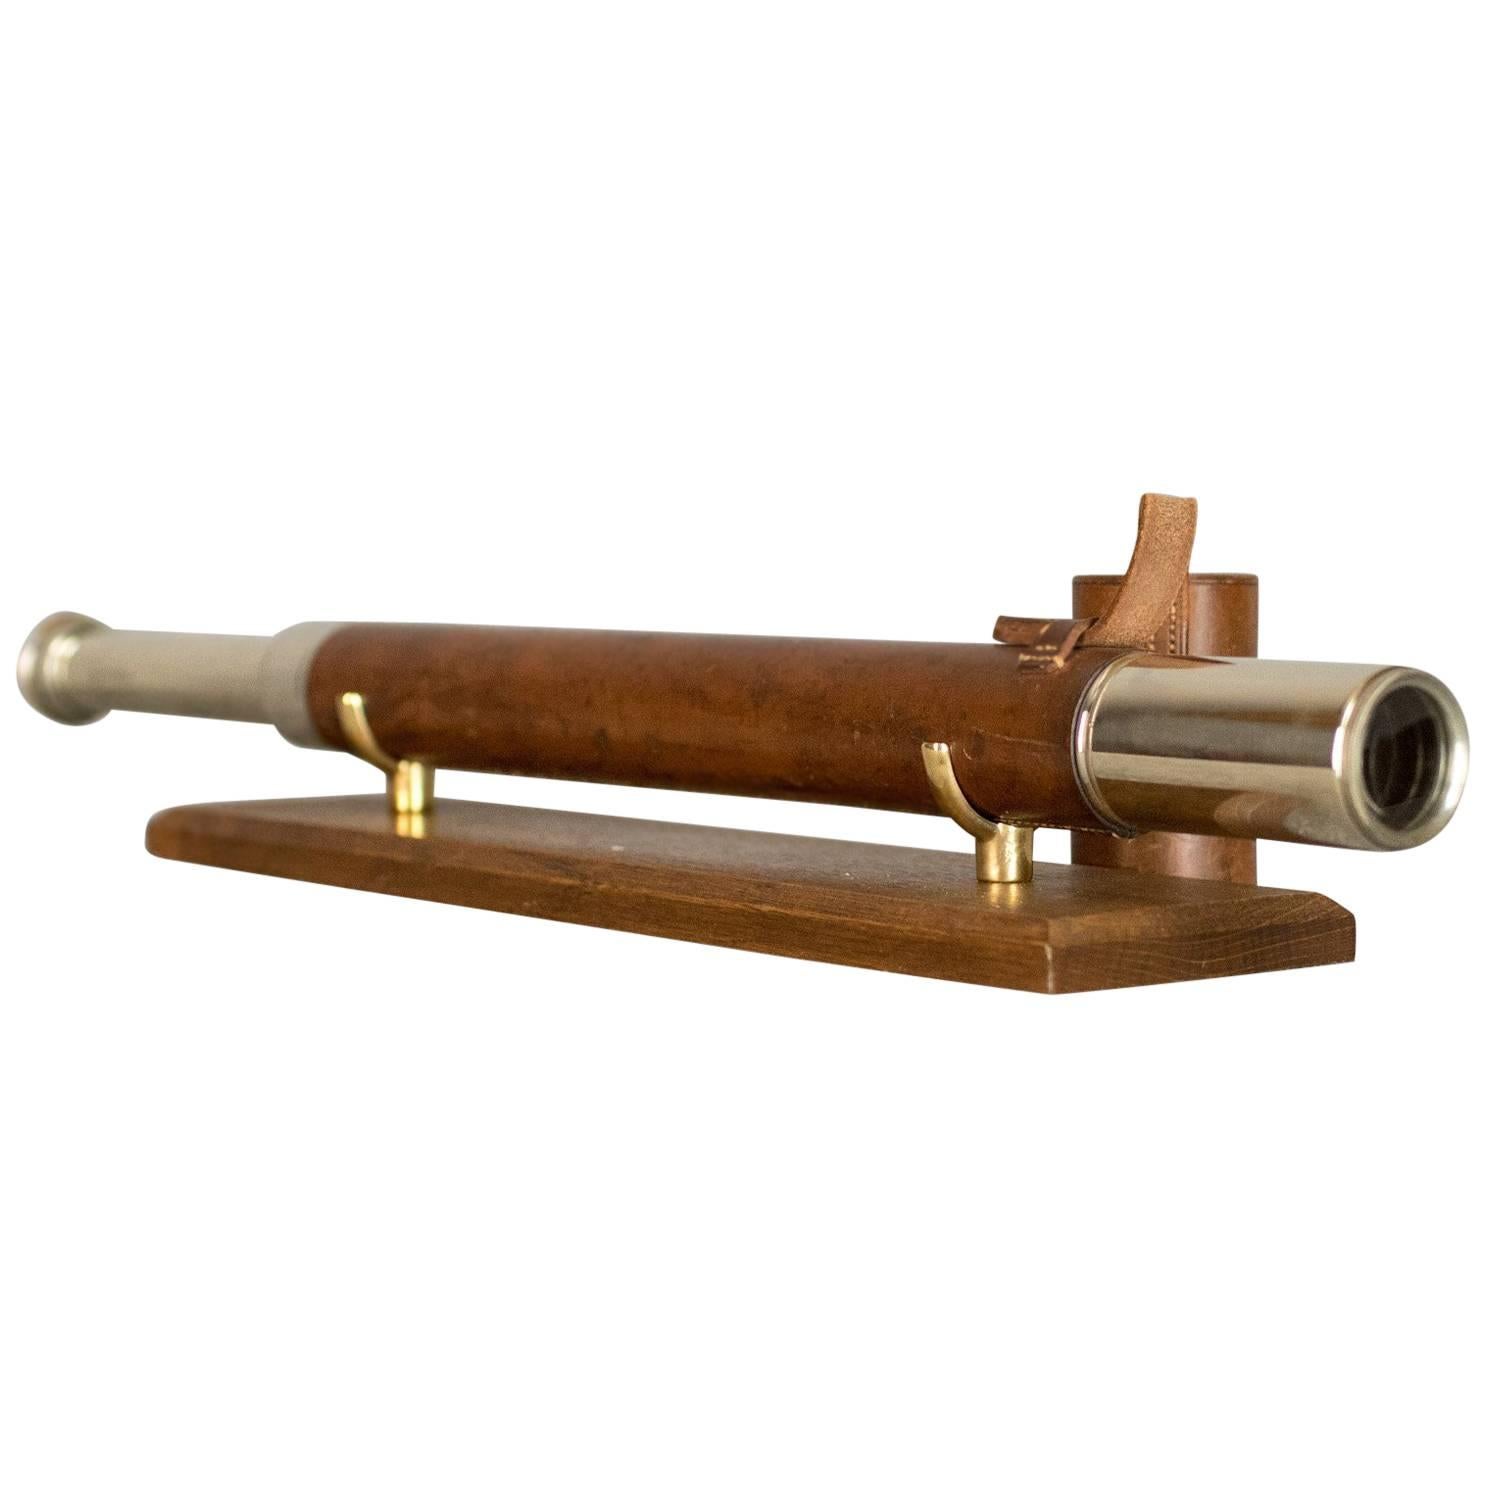 Antique Telescope, a Franks Ltd, Manchester, Officer of the Watch